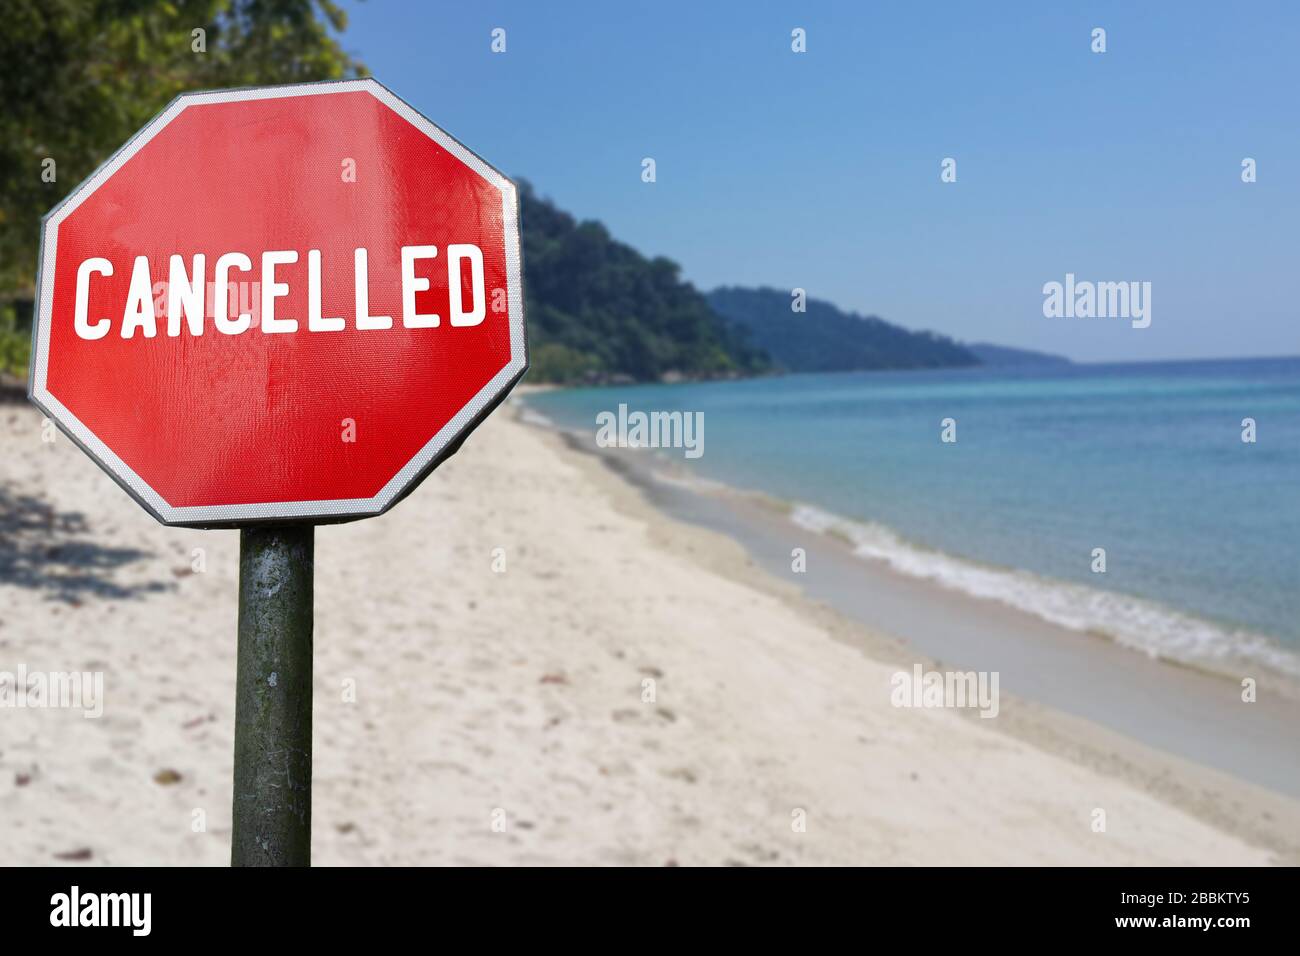 Red cancelled sign on beach background. COVID-19 pandemic quarantine. Cancelled vacation, travel, holiday plans because of corona virus. Stock Photo